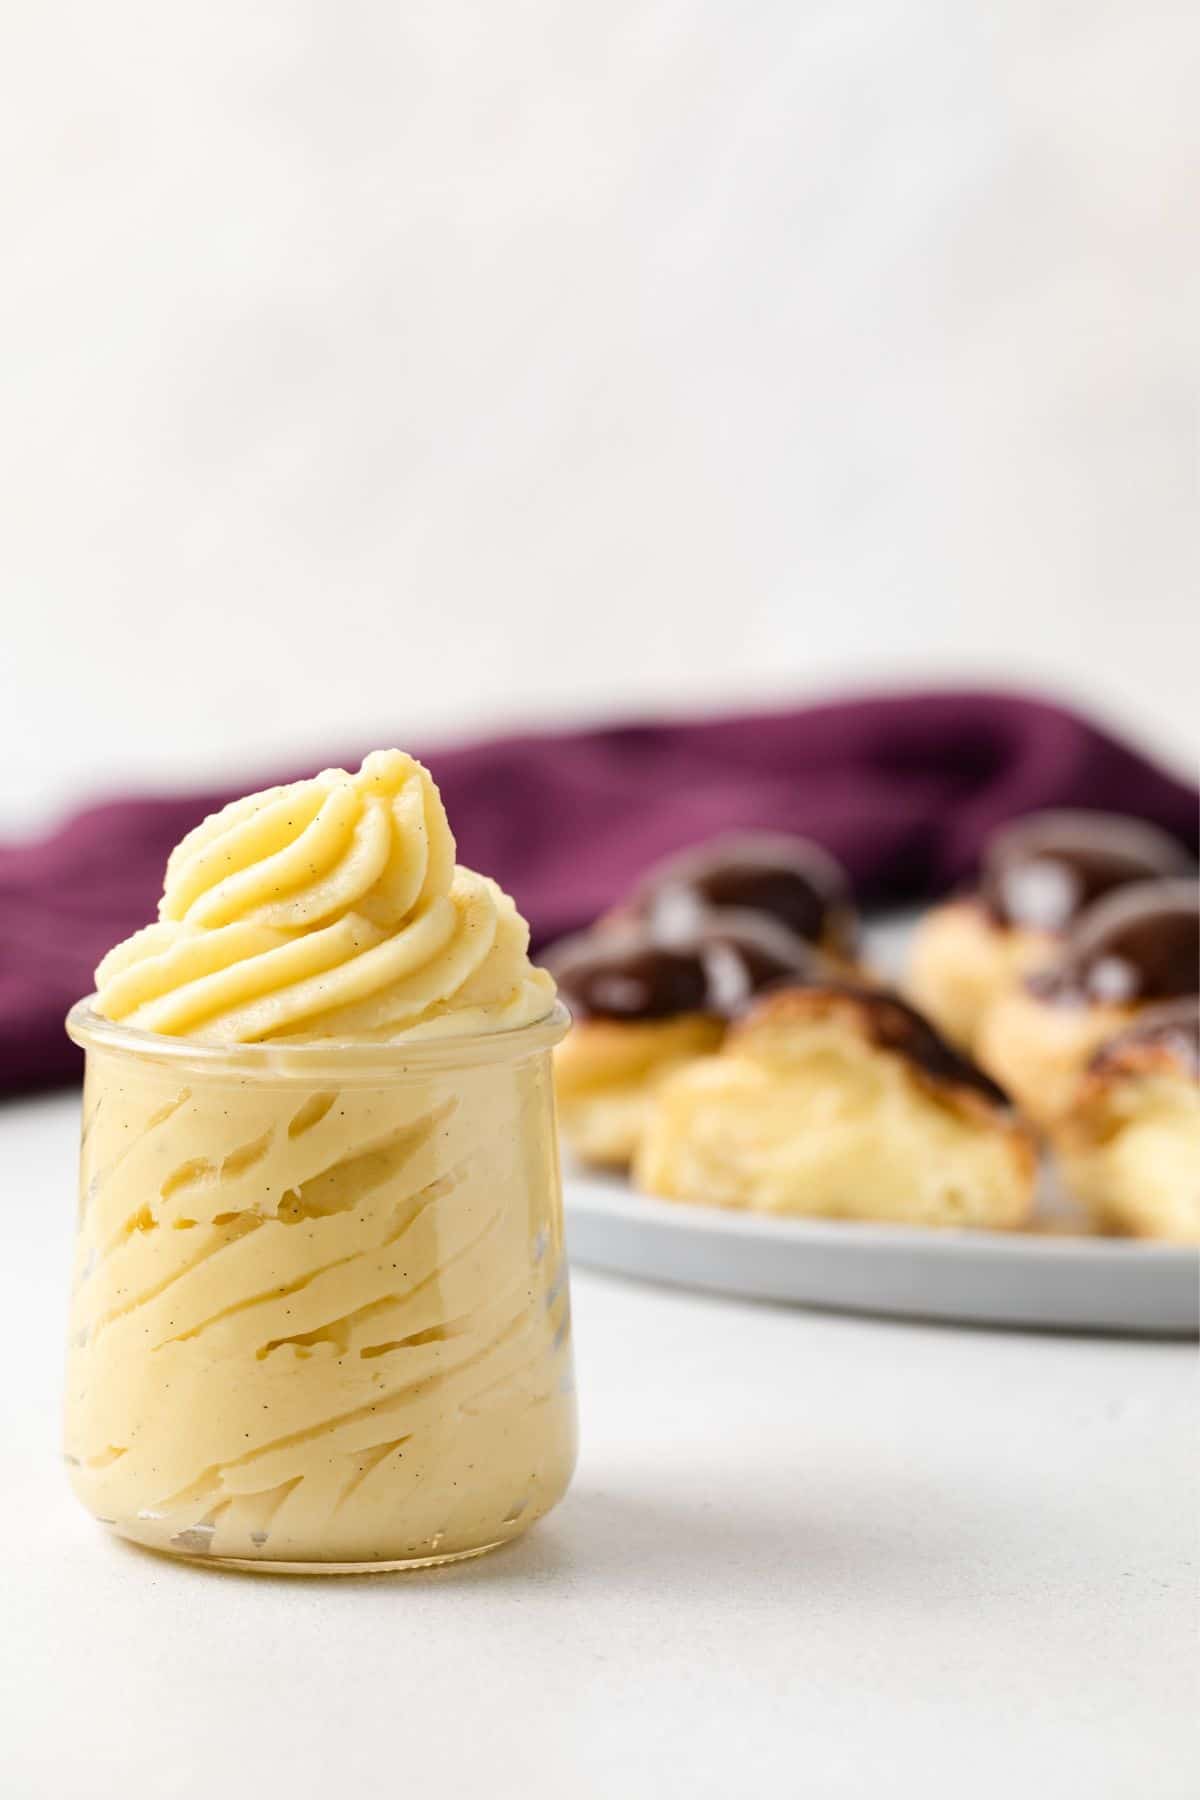 Pastry cream in a glass jar.